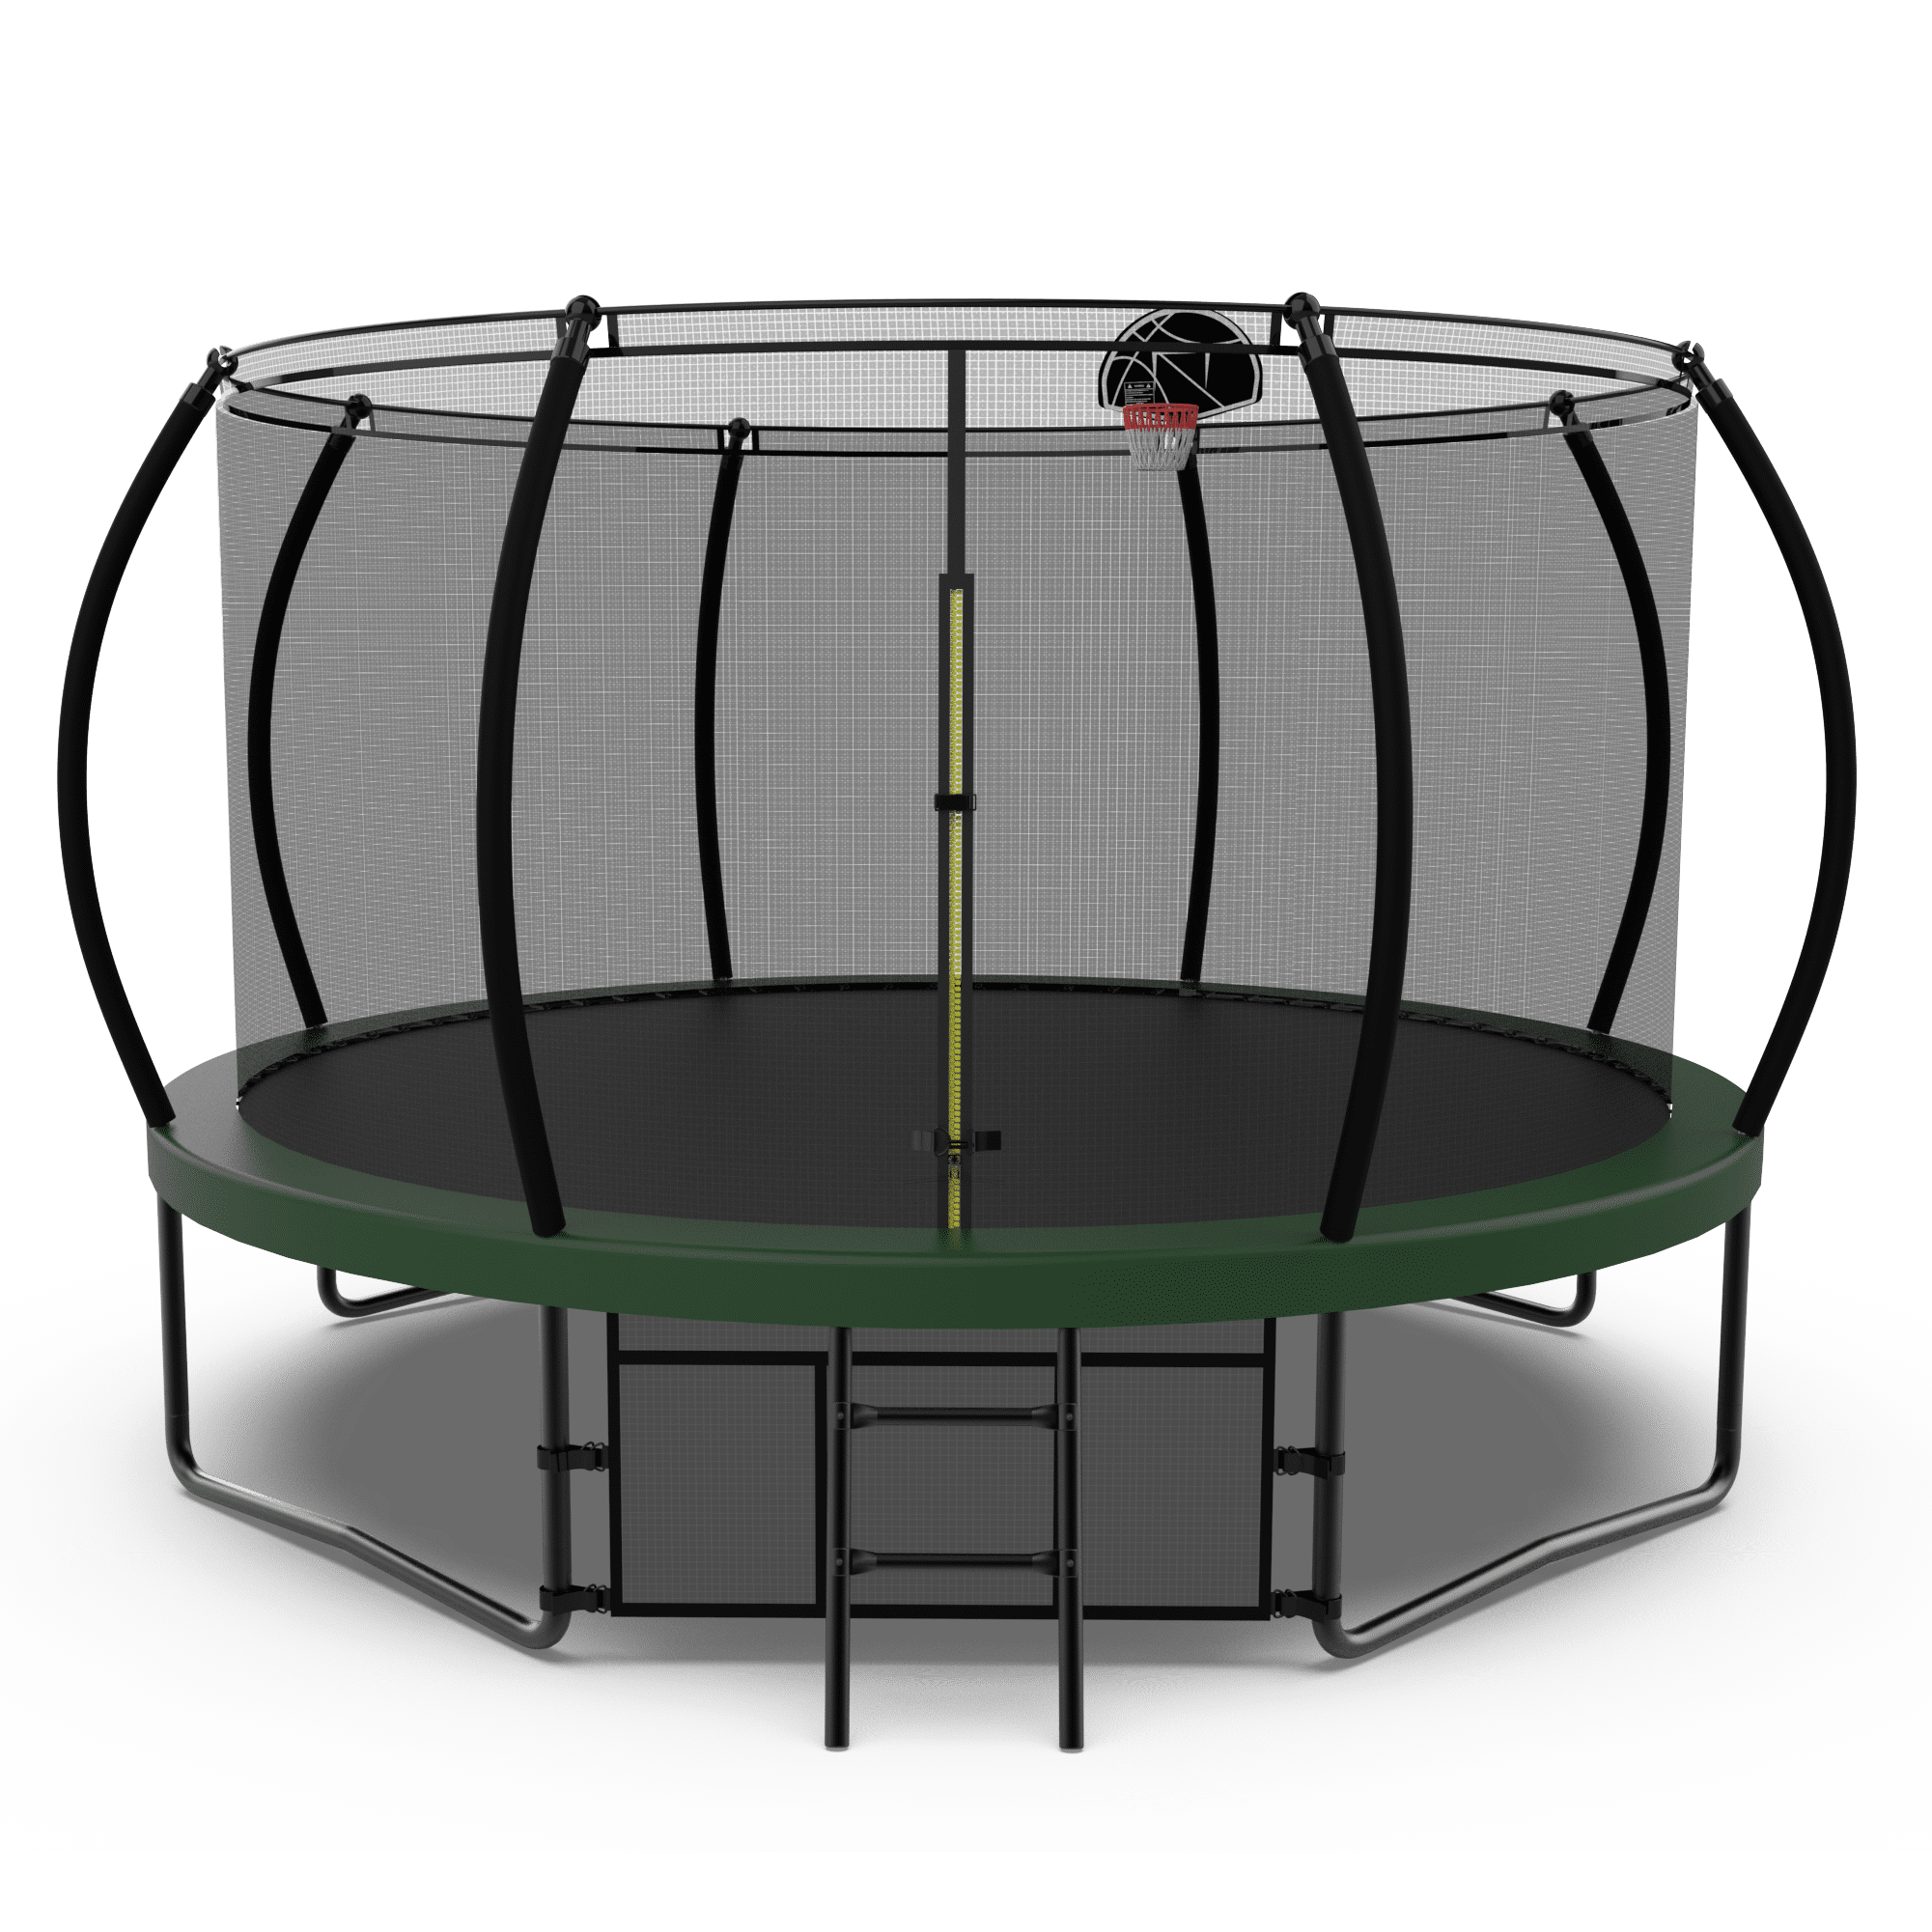 EUROCO 14FT Trampoline for Adults and Kids,Trampoline with Enclosure ...